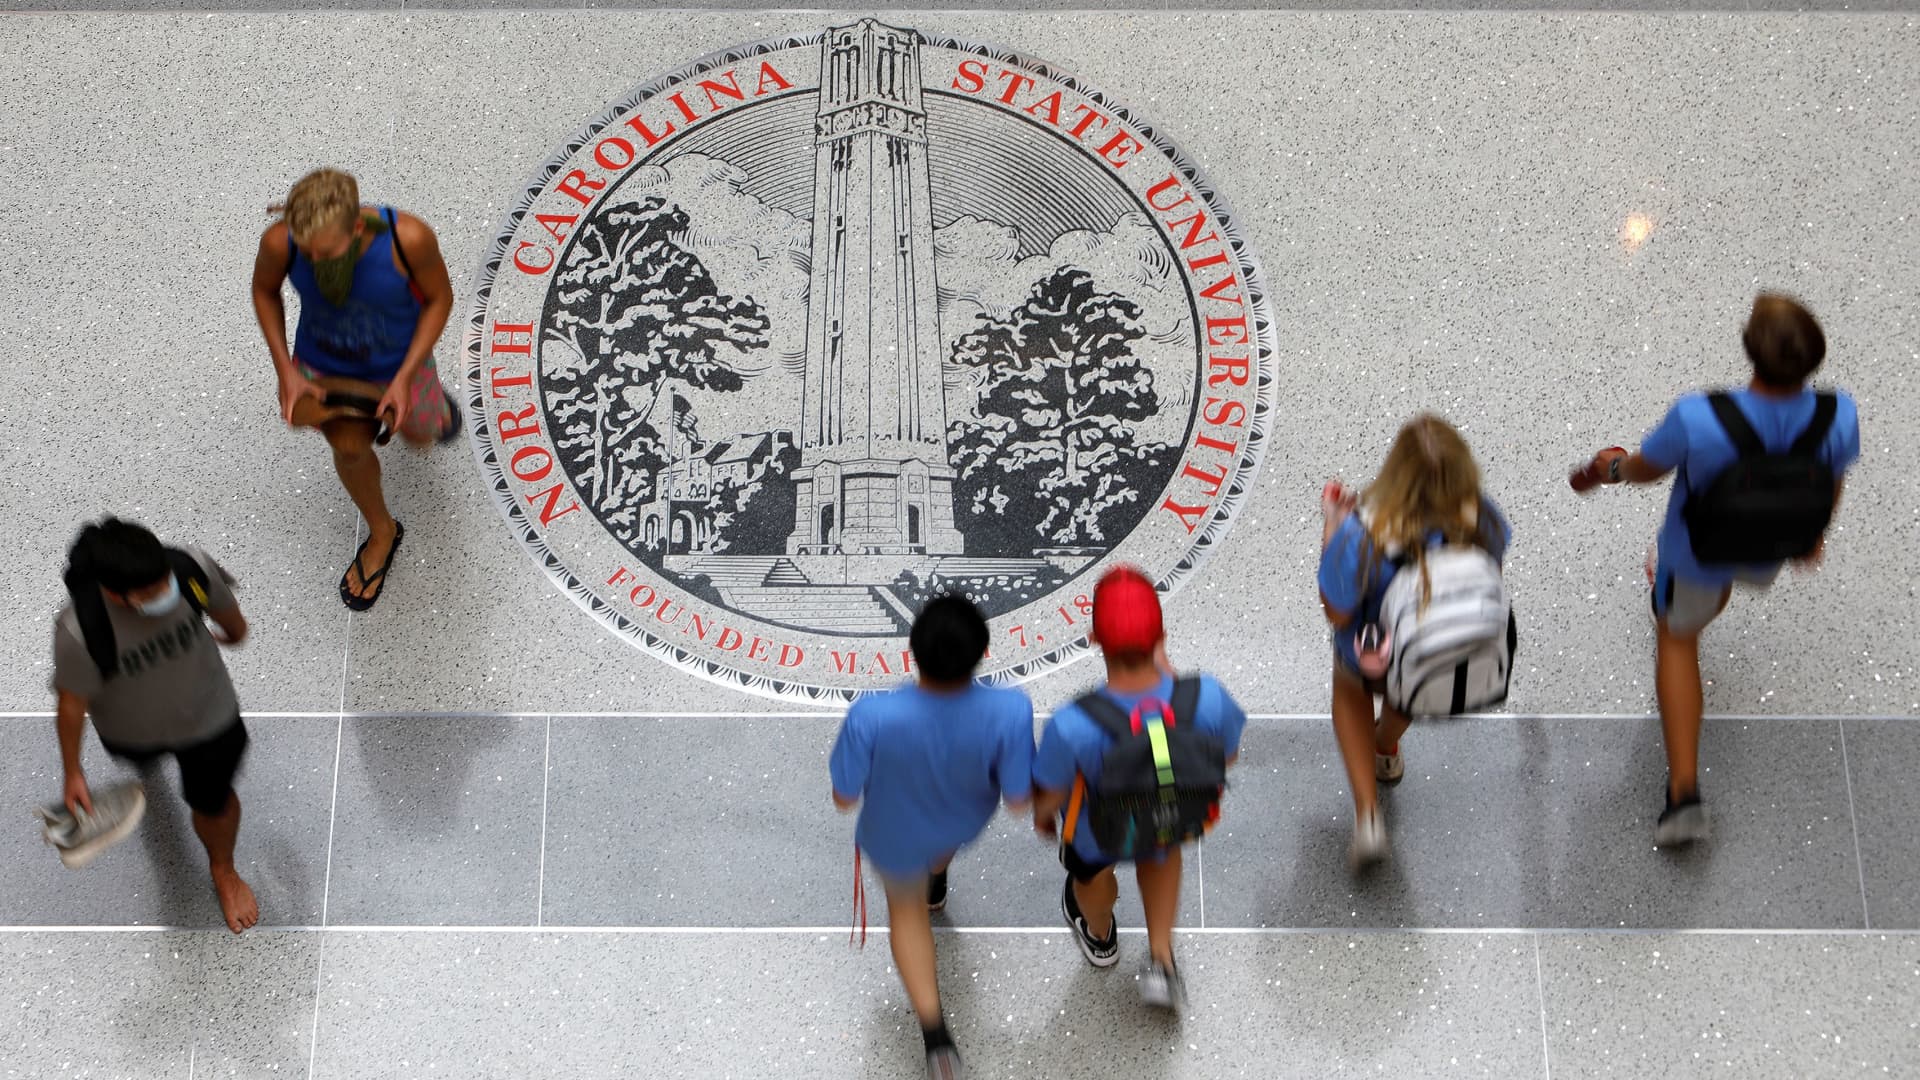 Students traverse the Talley Student Union at the campus of North Carolina State University in Raleigh, North Carolina, U.S. August 7, 2020.